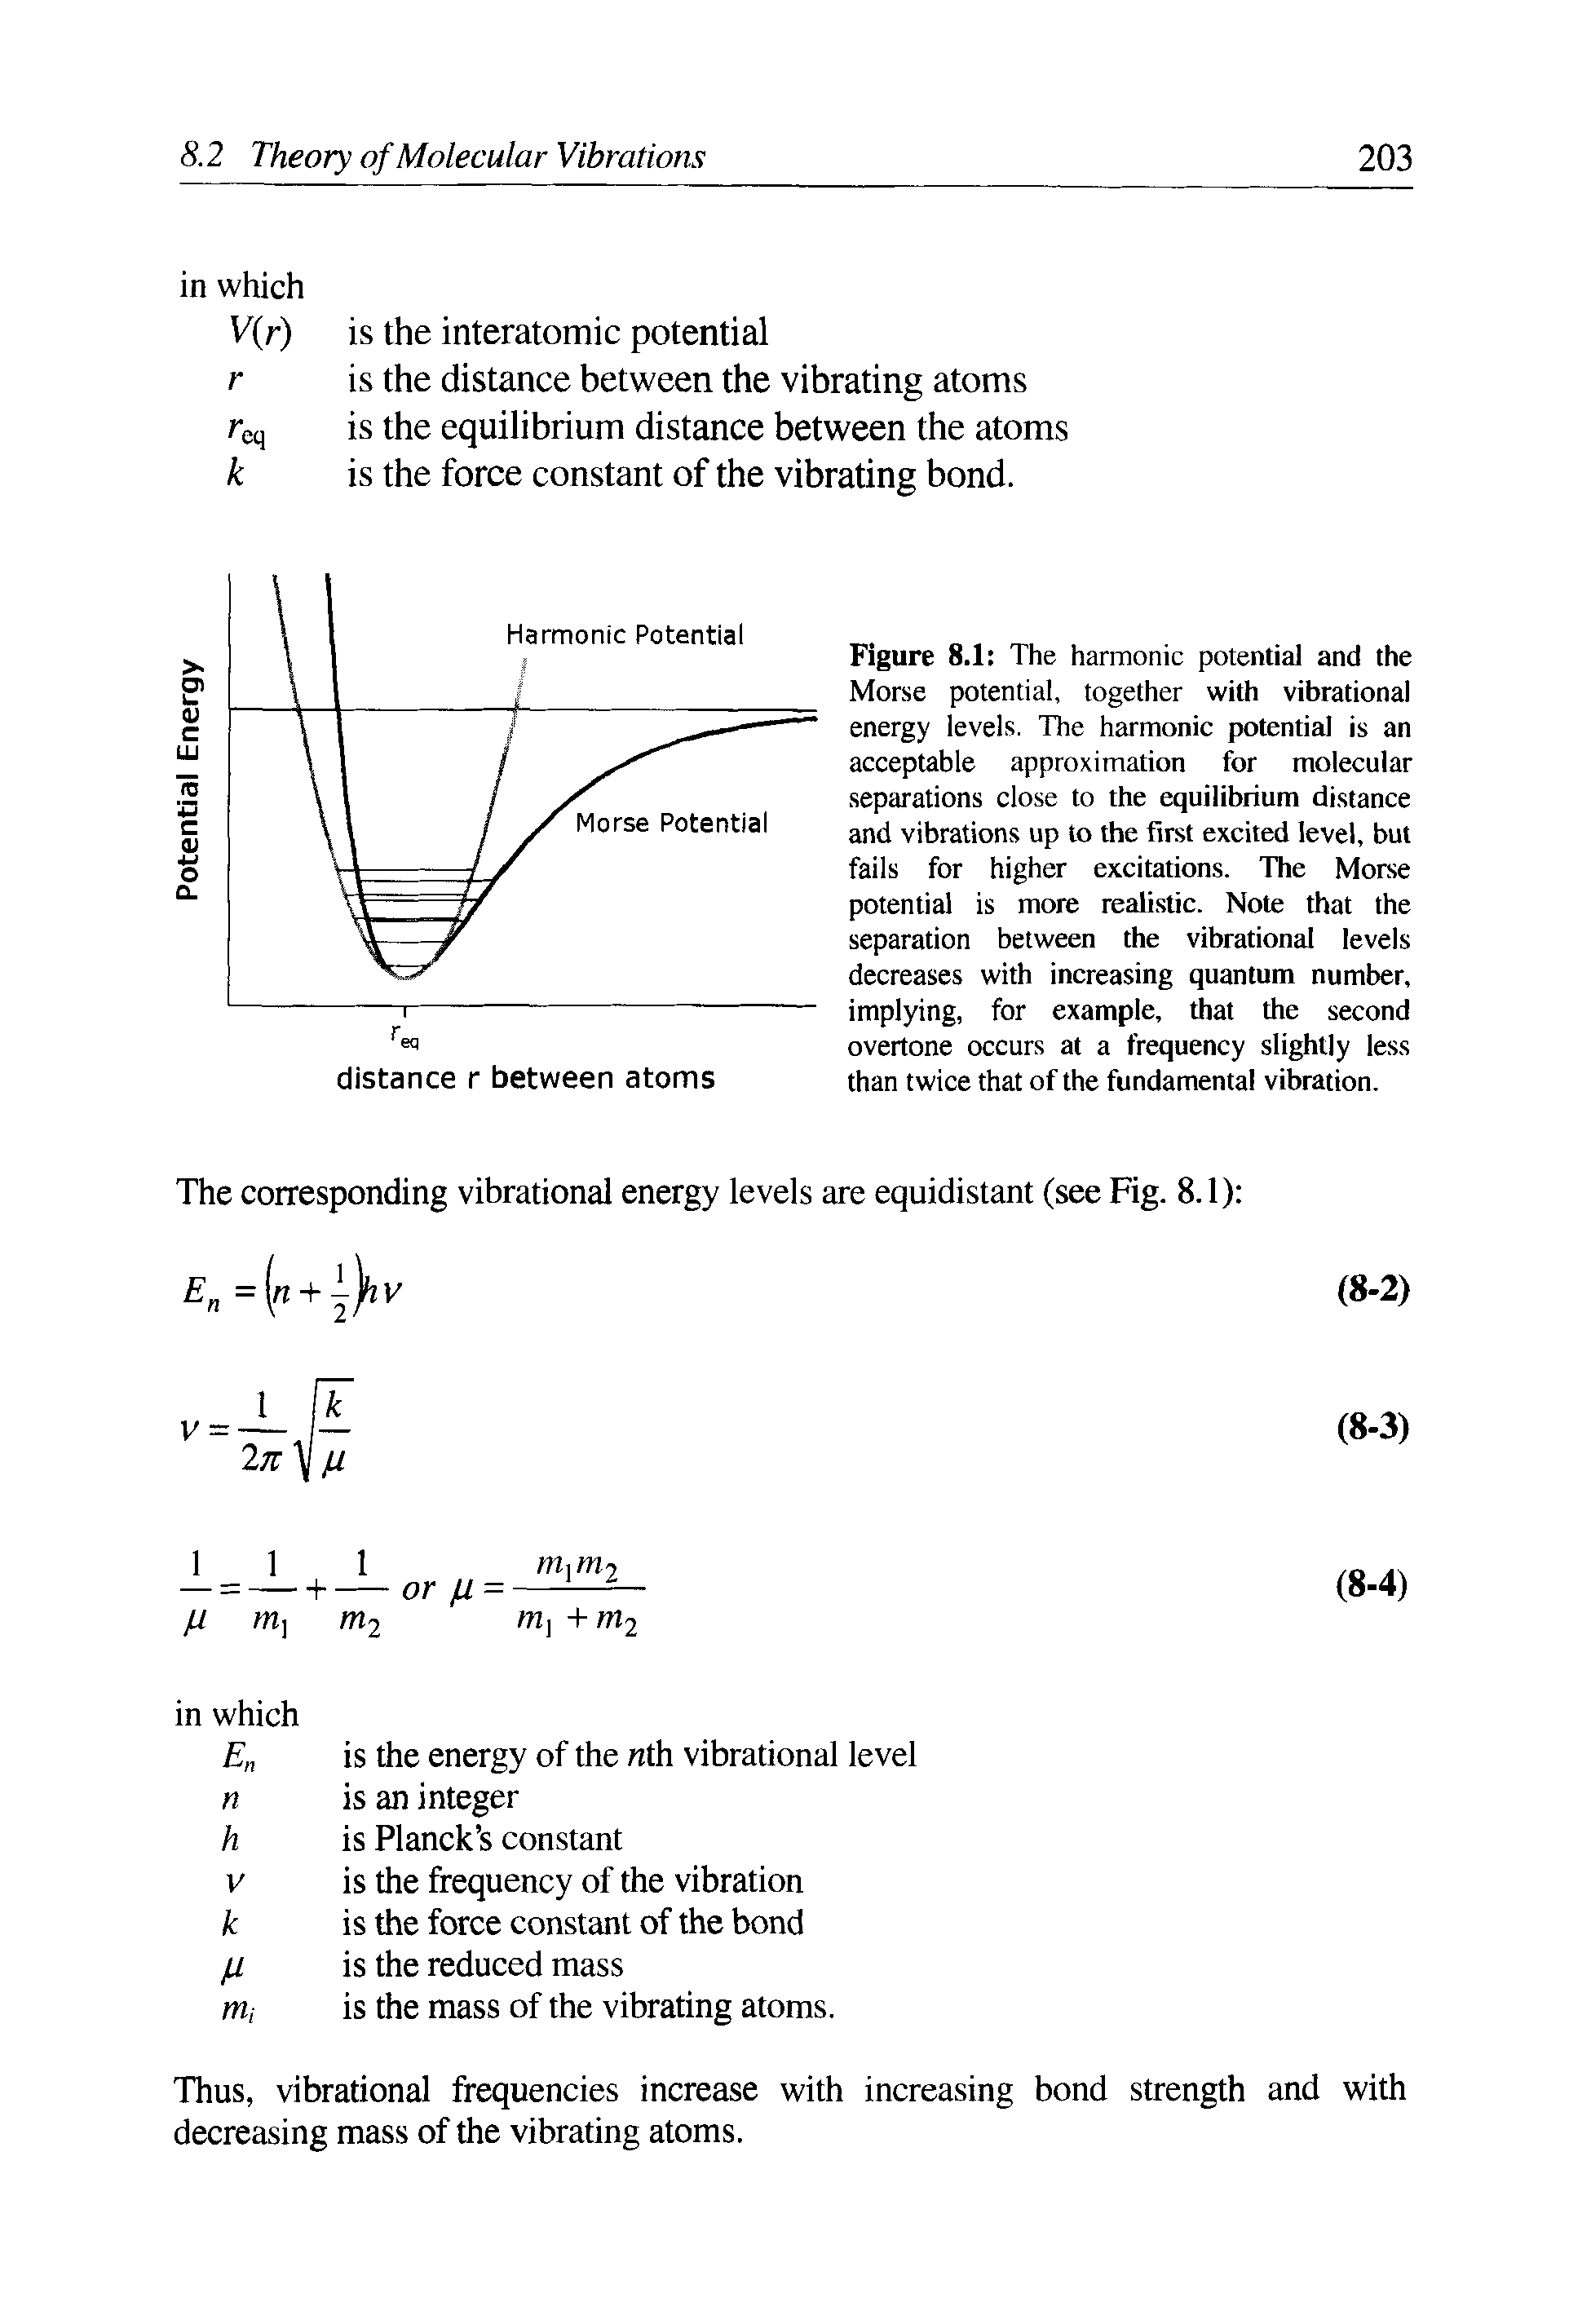 Figure 8.1 The harmonic potential and the Morse potential, together with vibrational energy levels. The harmonic potential is an acceptable approximation for molecular separations close to the equilibrium distance and vibrations up to the first excited level, but fails for higher excitations. The Morse potential is more realistic. Note that the separation between the vibrational levels decreases with increasing quantum number, implying, for example, that the second overtone occurs at a frequency slightly less than twice that of the fundamental vibration.